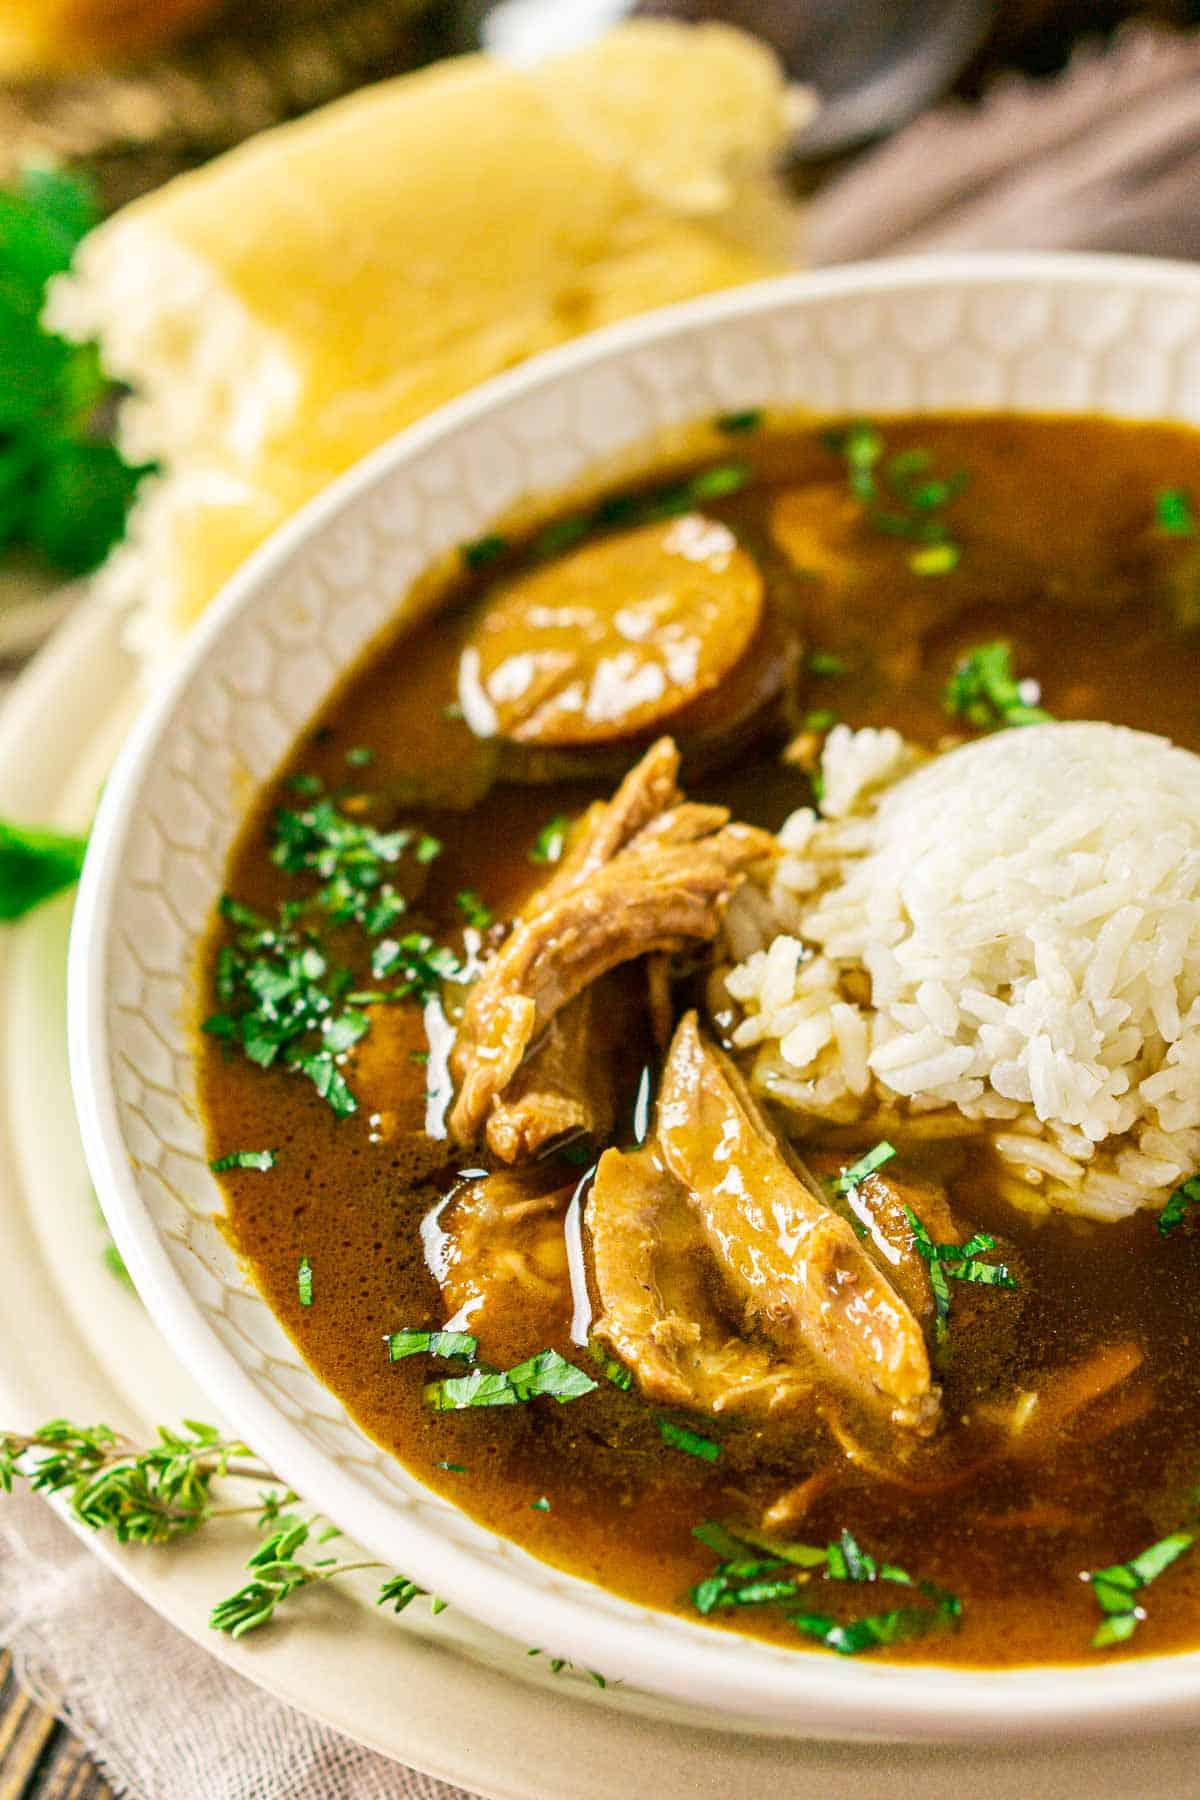 A close-up shot of the dumb gumbo with bread torn off behind it.